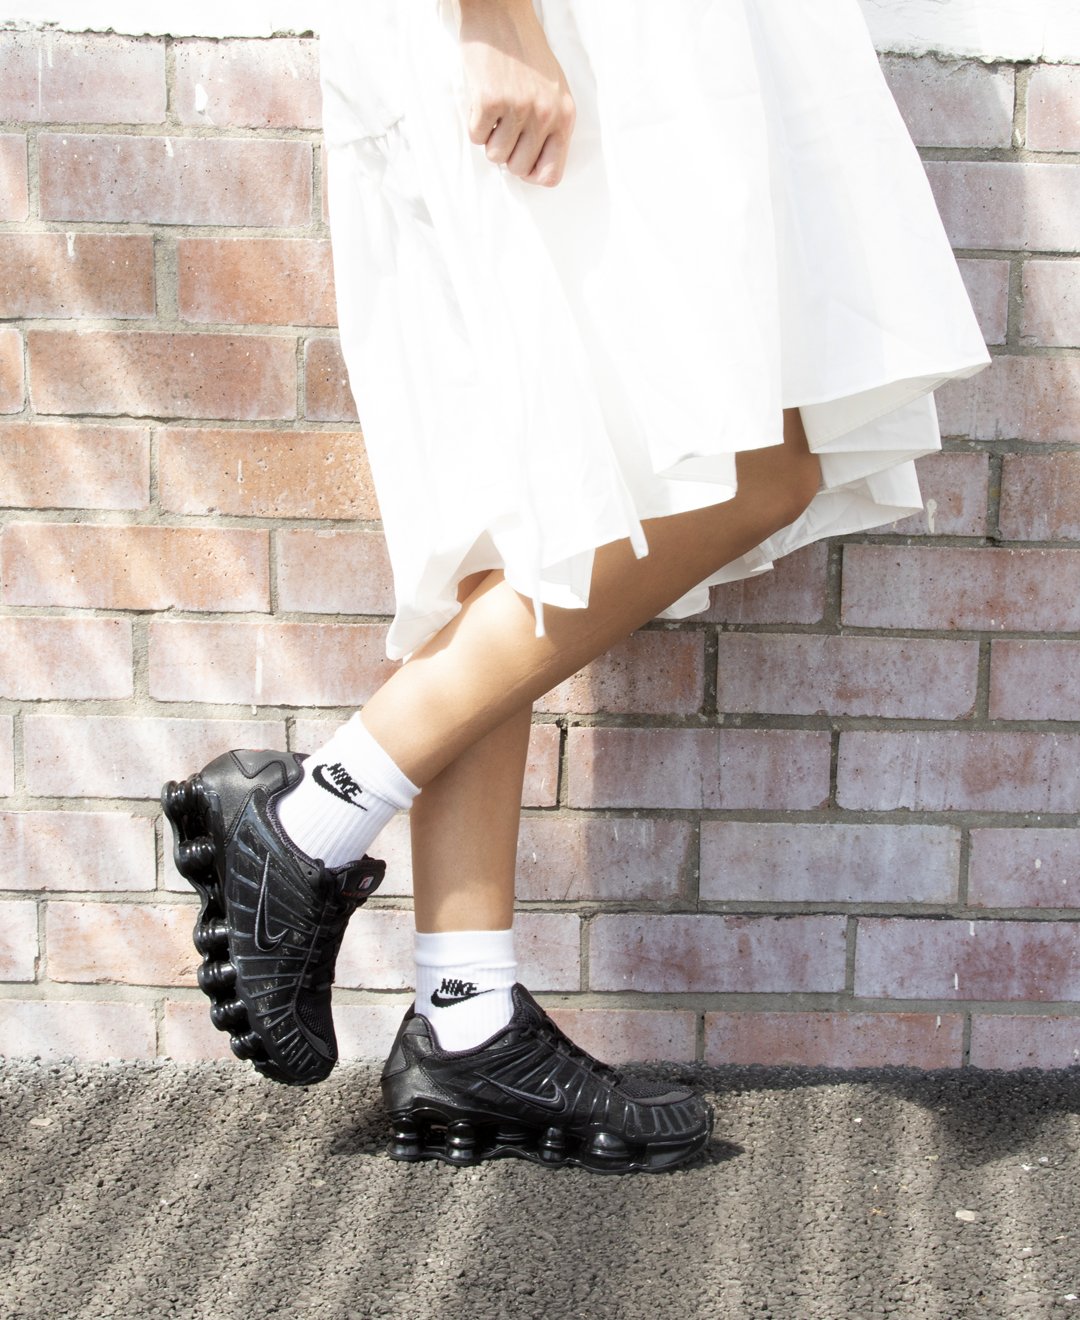 OFFICE Shoes on Twitter: The #Nike Shox TL has just landed 🚨 in white or black to suit your style - wear with everything from pretty dresses to sleek separates 👟😎🔥 #